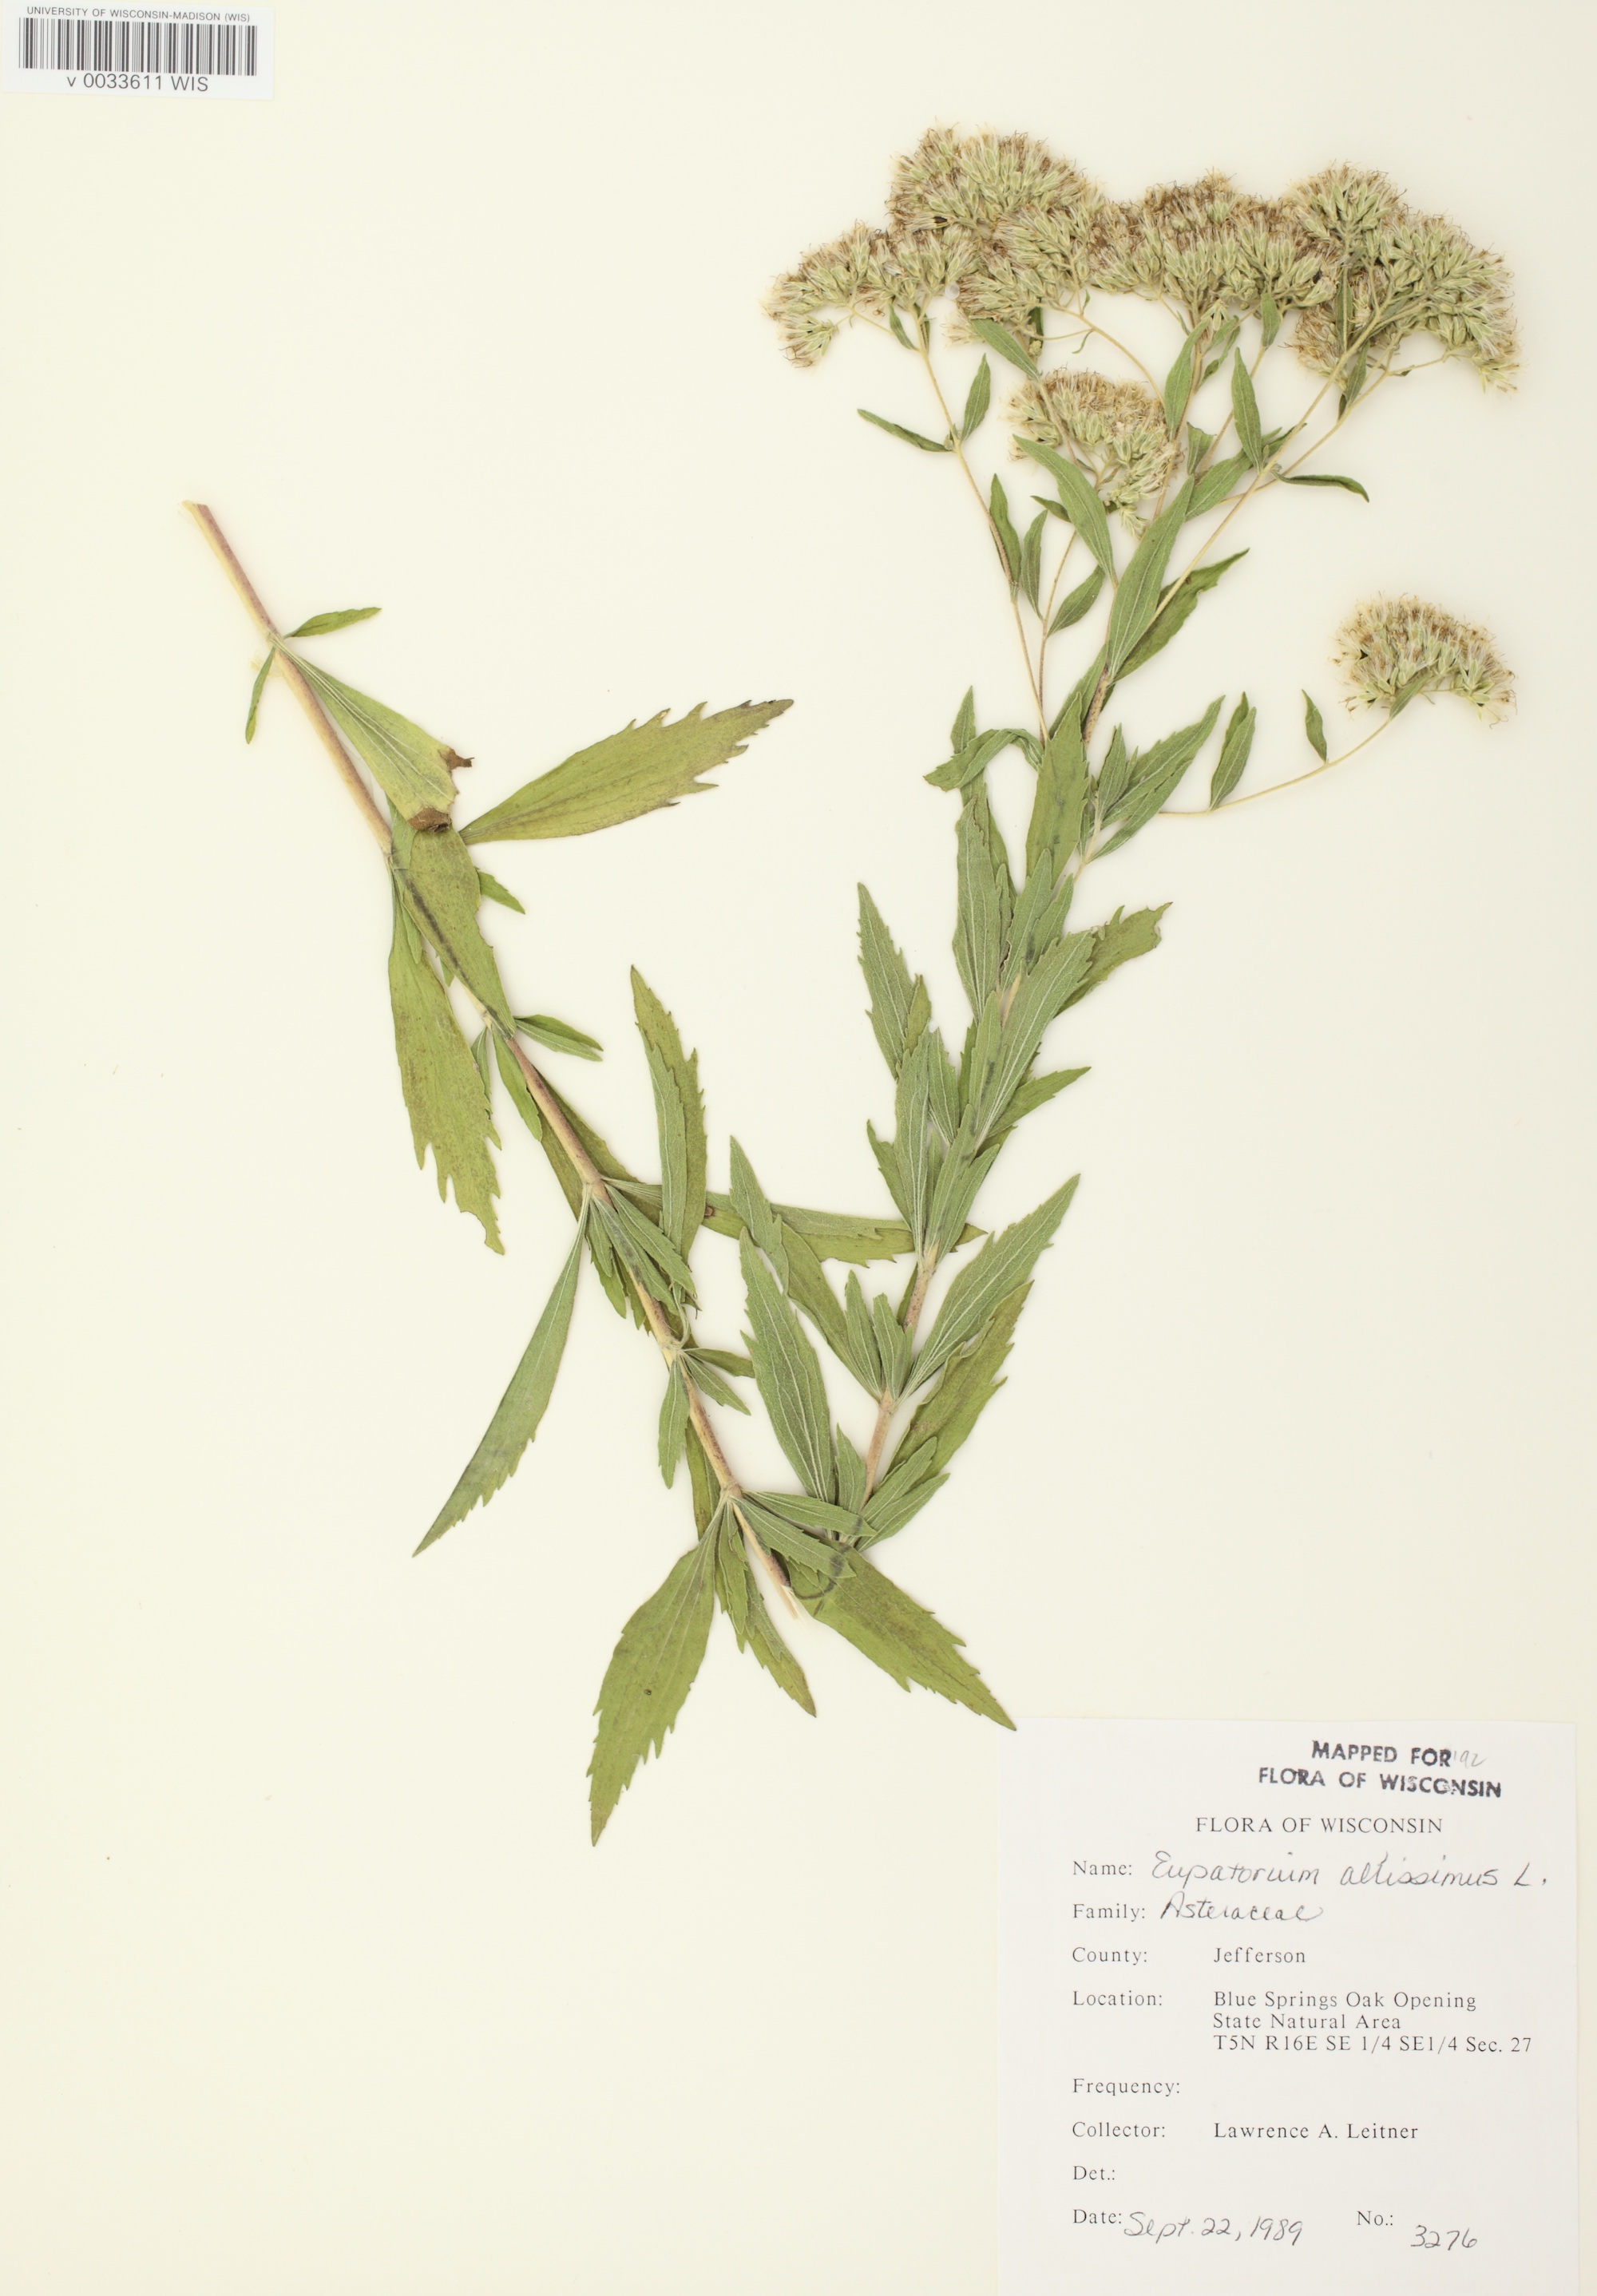 Tall Boneset specimen collected in Jefferson County in the Blue Springs Oak Opening State Natual Area on September 22, 1989.